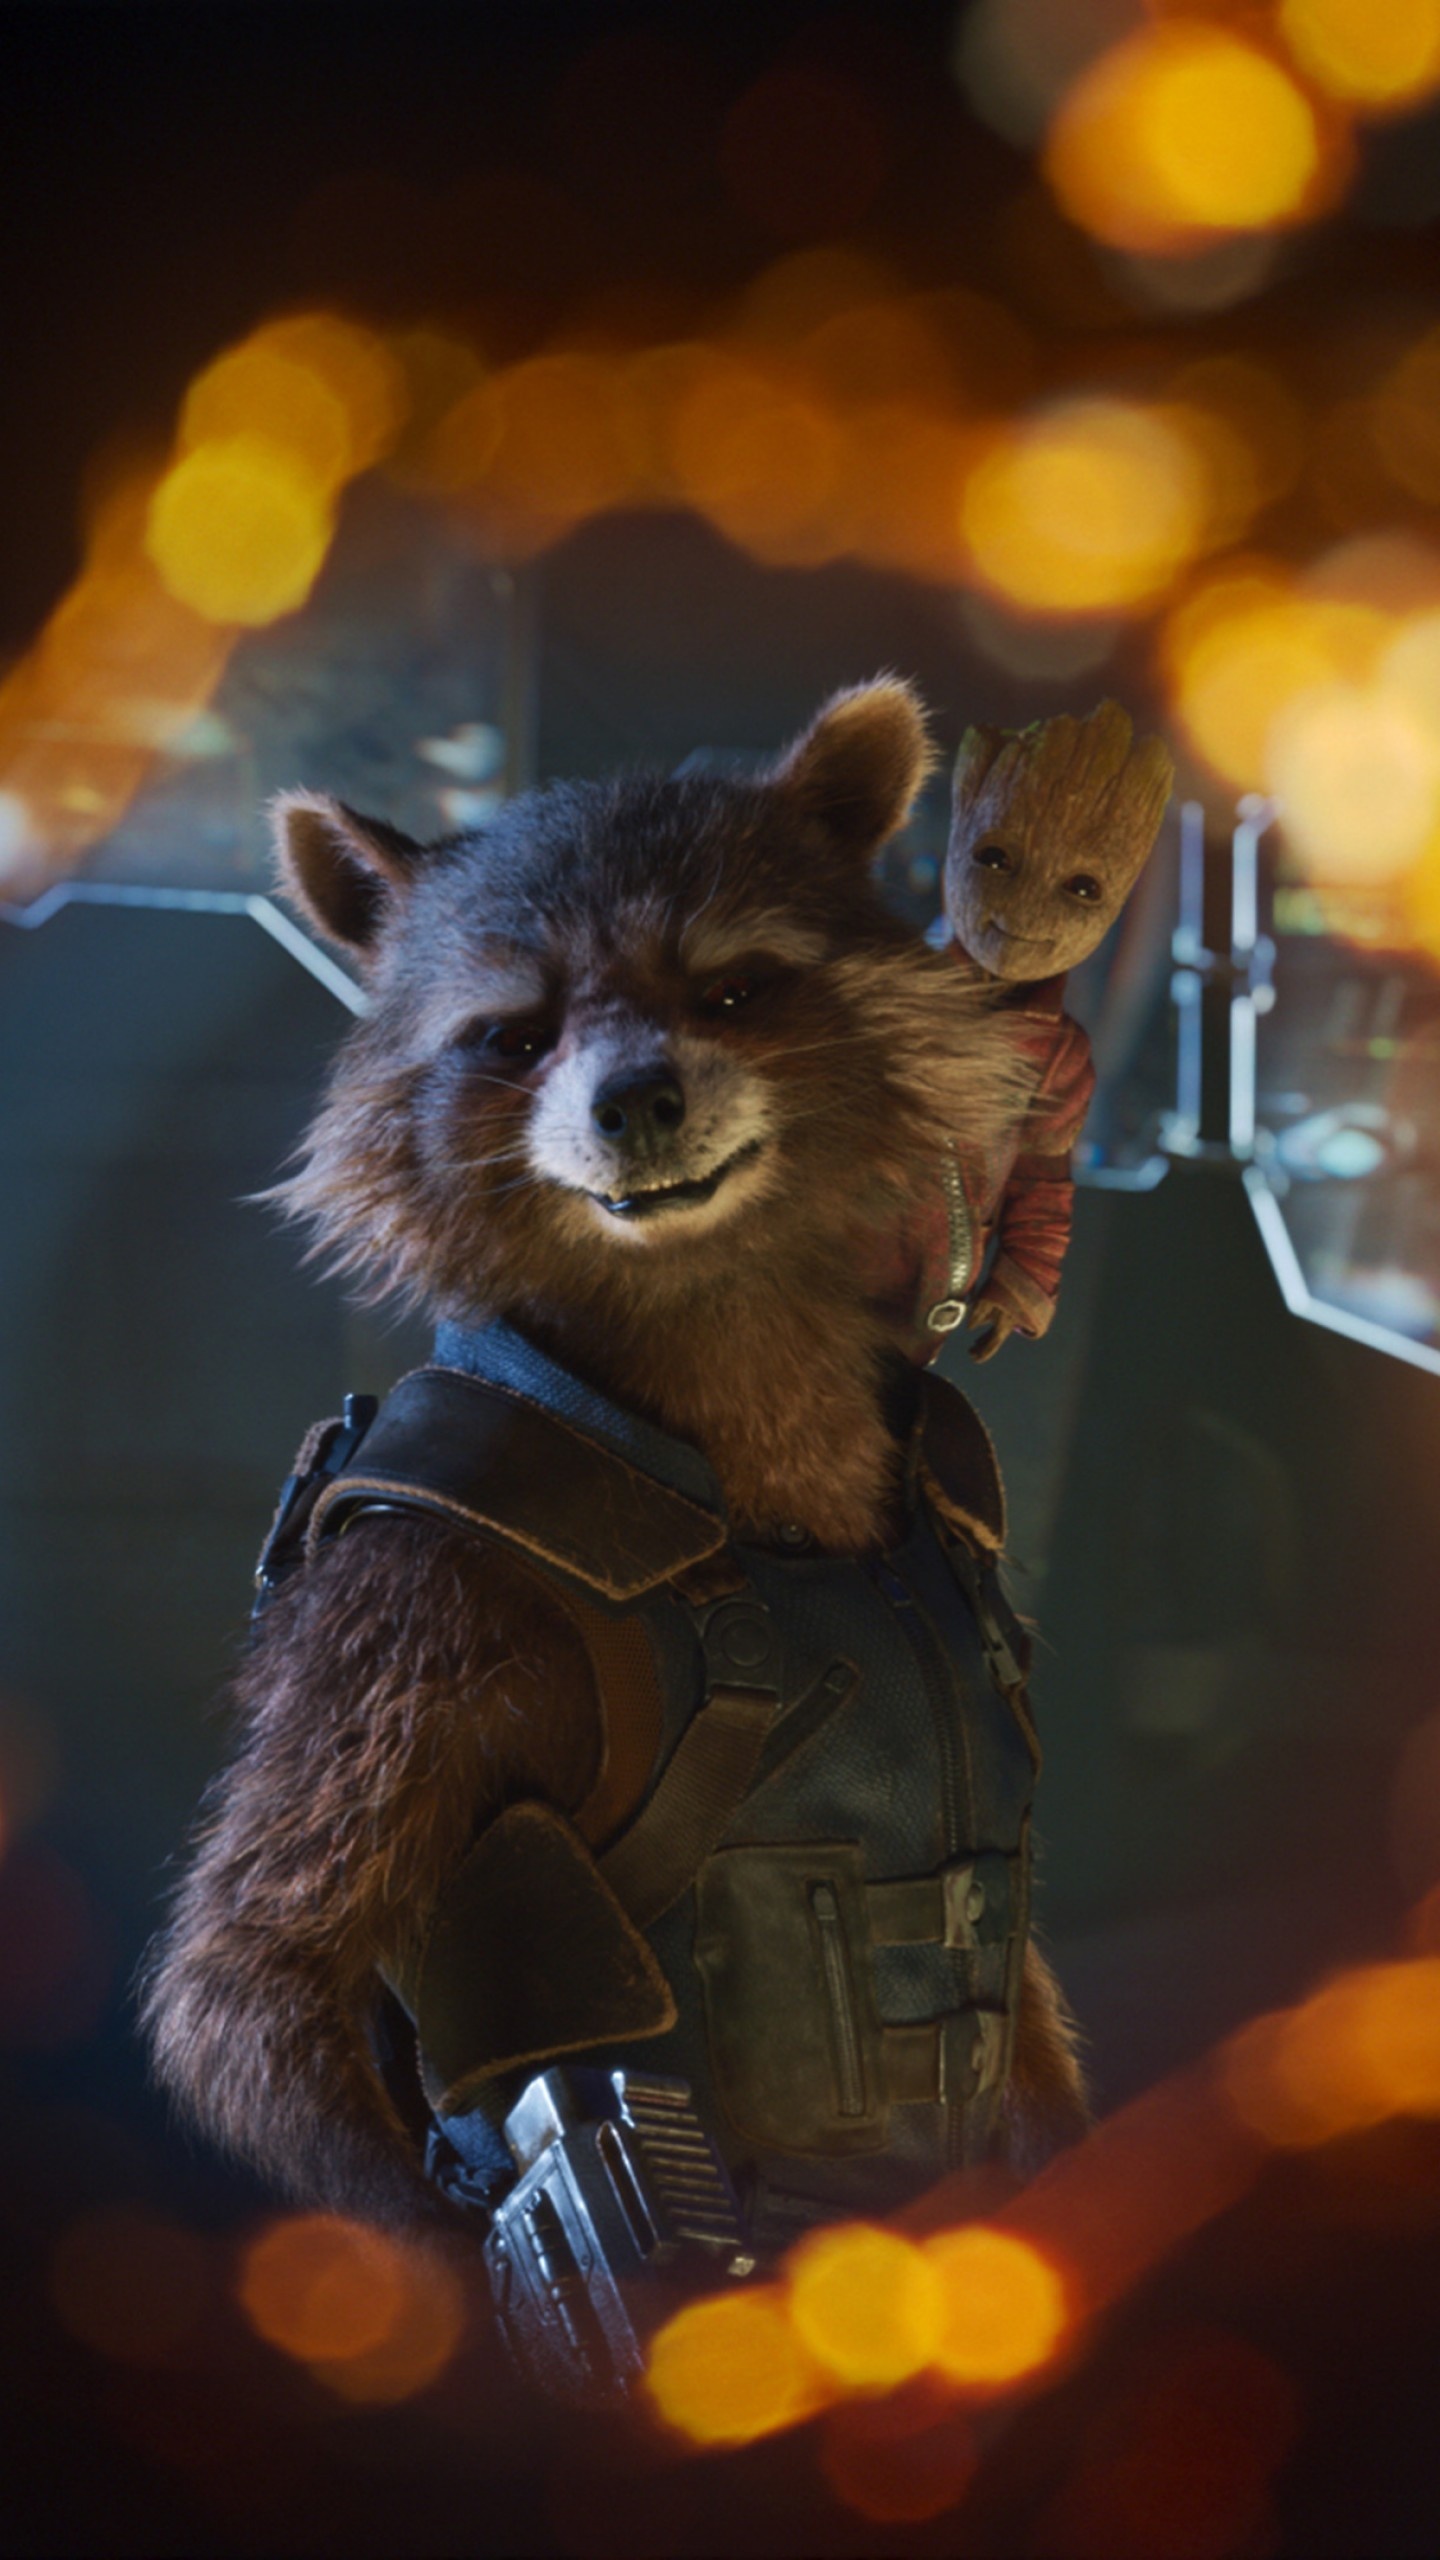 Guardians of the Galaxy Vol 2, Baby Groot and Rocket, 4K movie wallpaper, 1440x2560 HD Phone